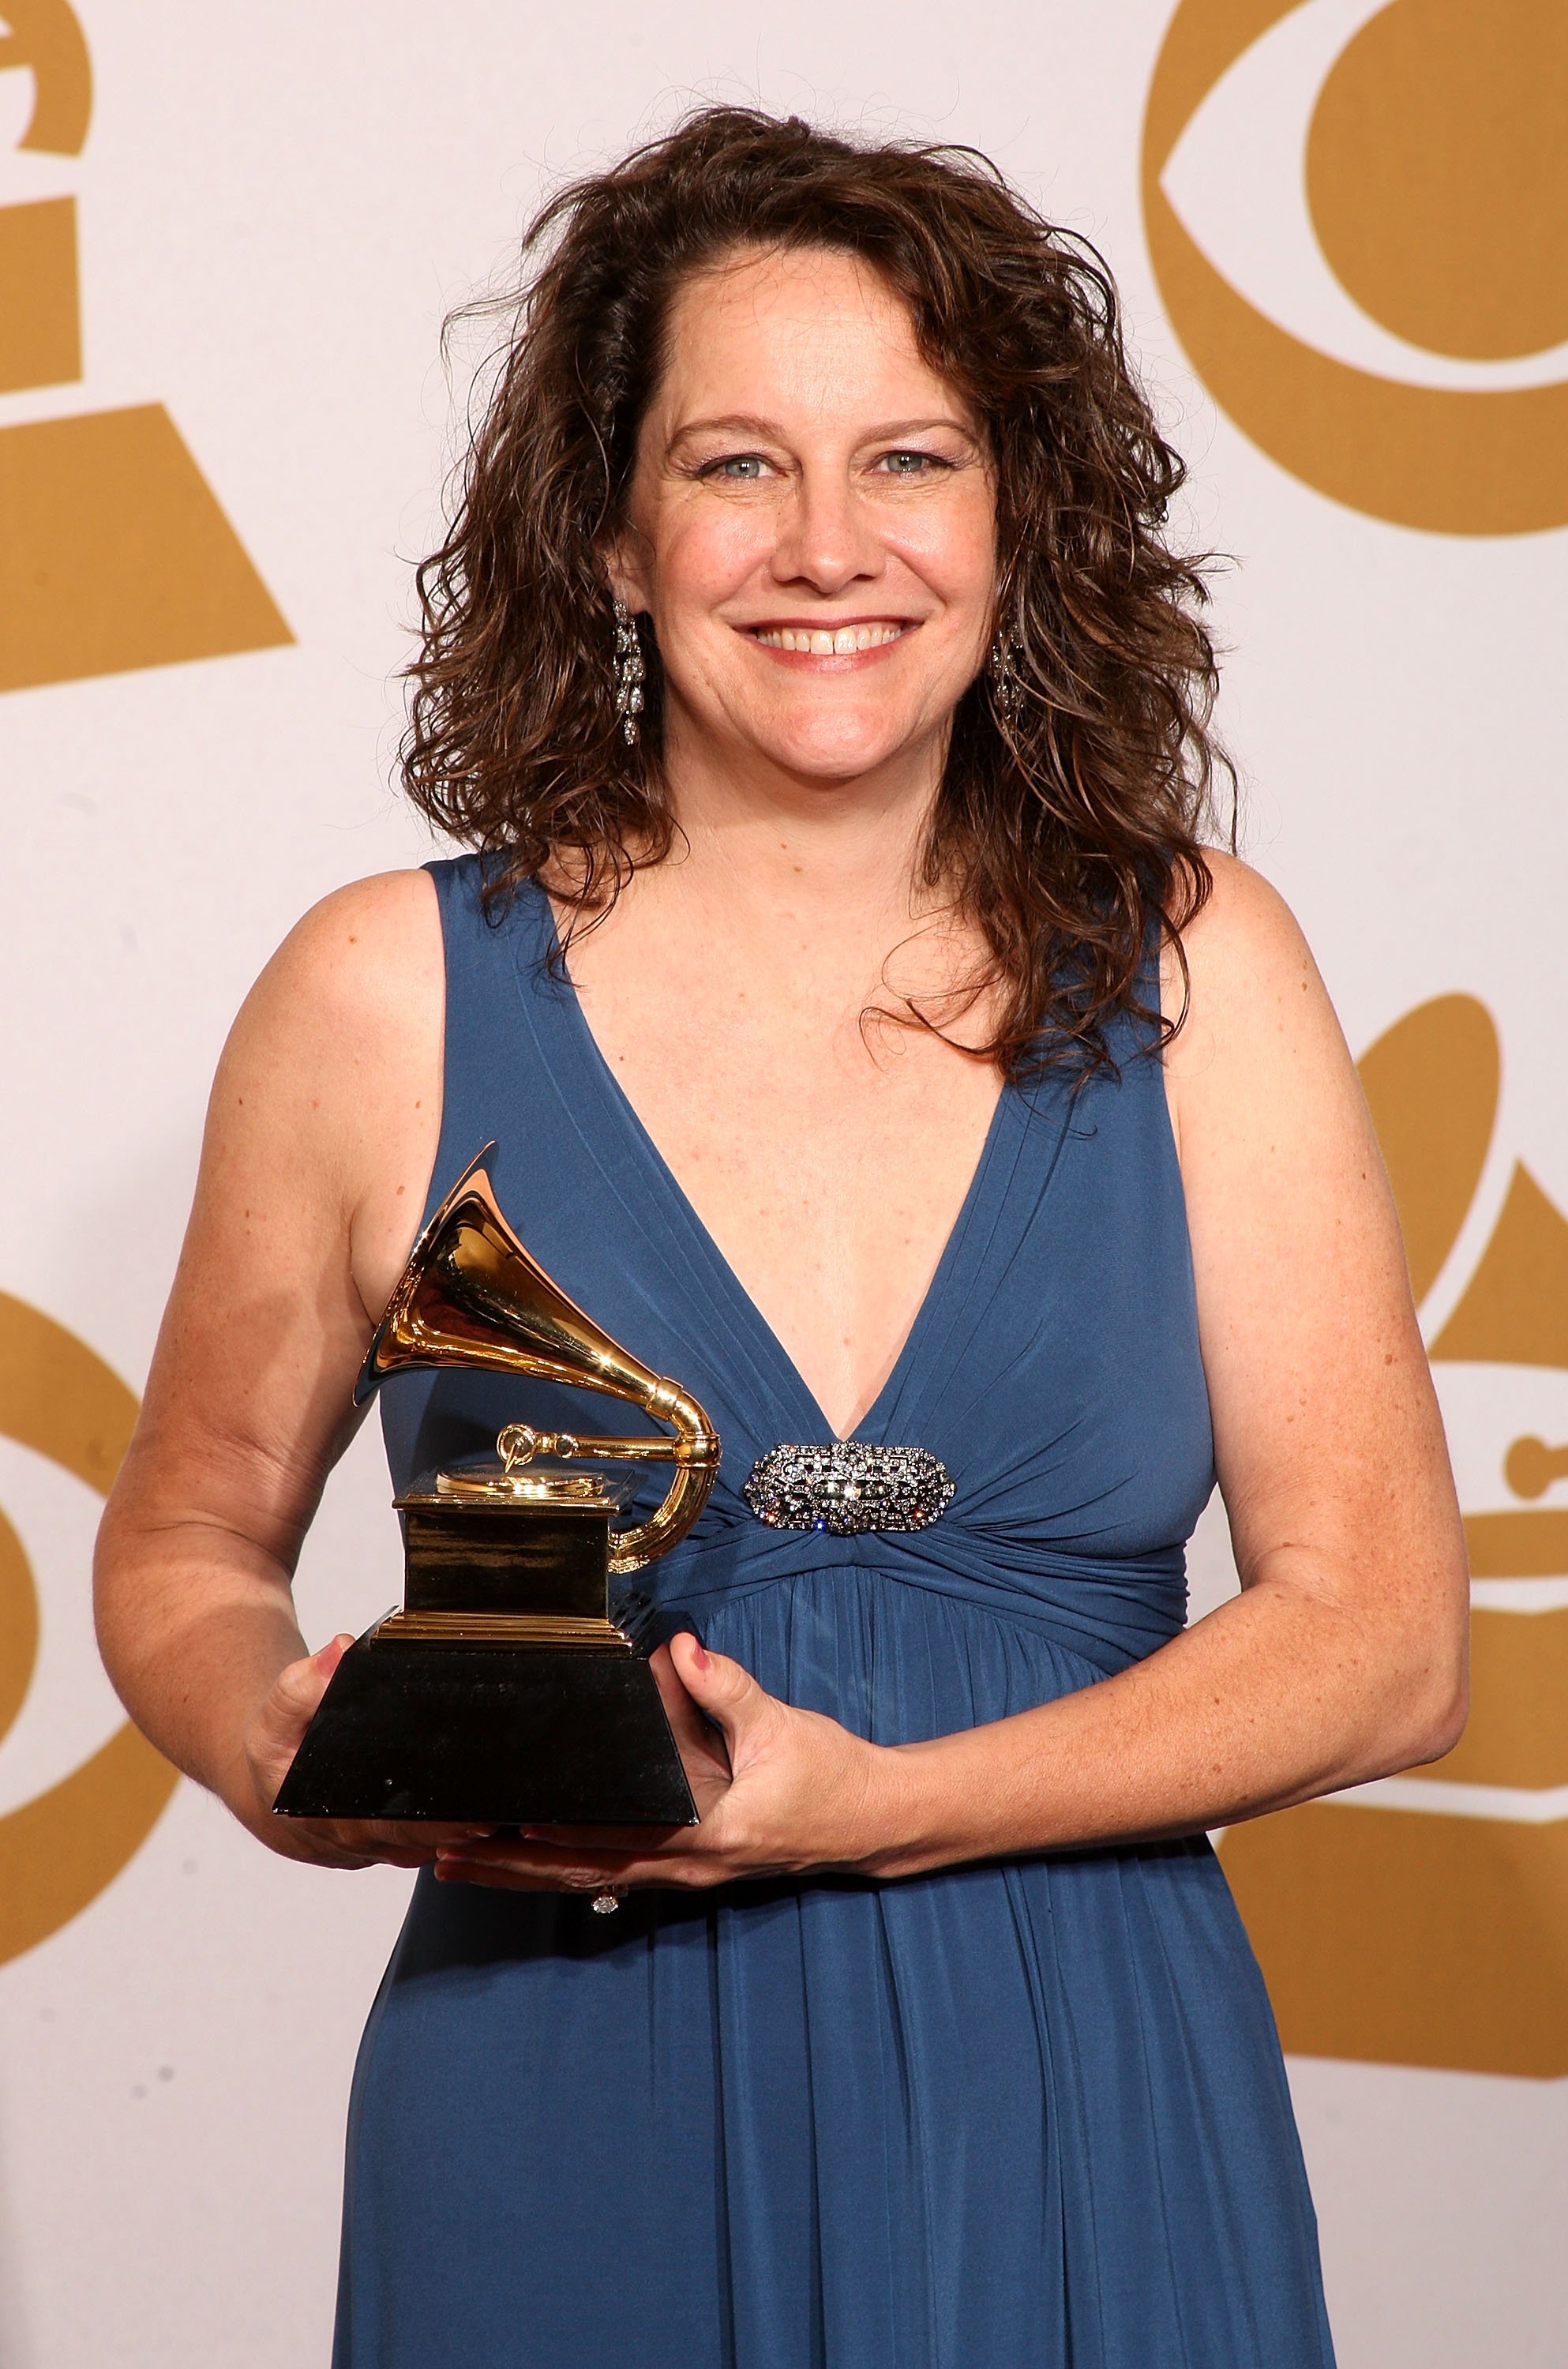 Kelly Carlin poses in the press room with George Carlin's Best Comedy Album award during the 51st Annual Grammy Awards held at the Staples Center on February 8, 2009 in Los Angeles, California. | Source: Getty Images